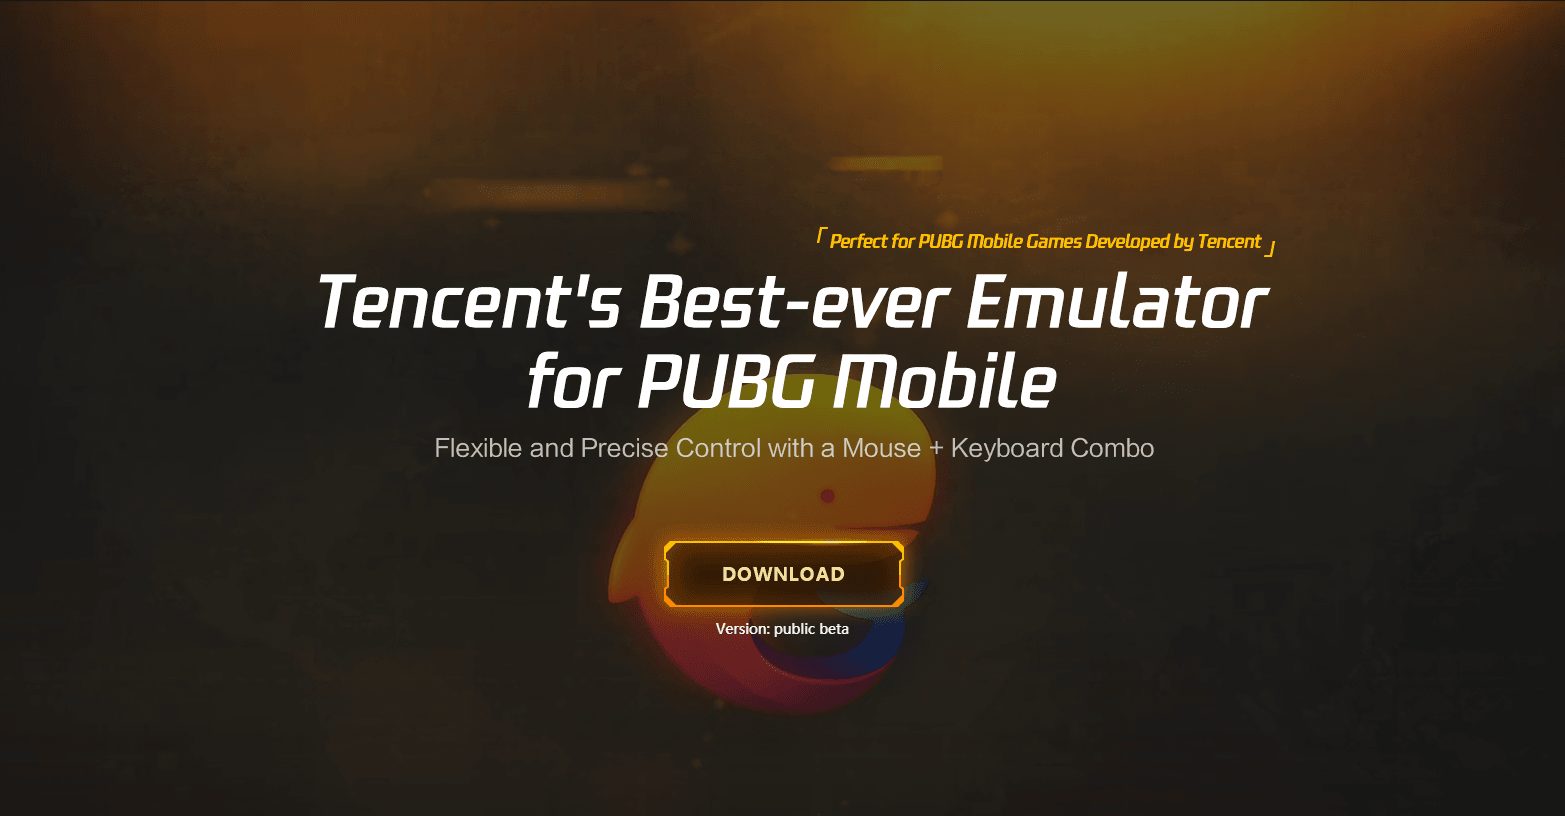 Play PUBG mobile on Tencent Gaming Buddy